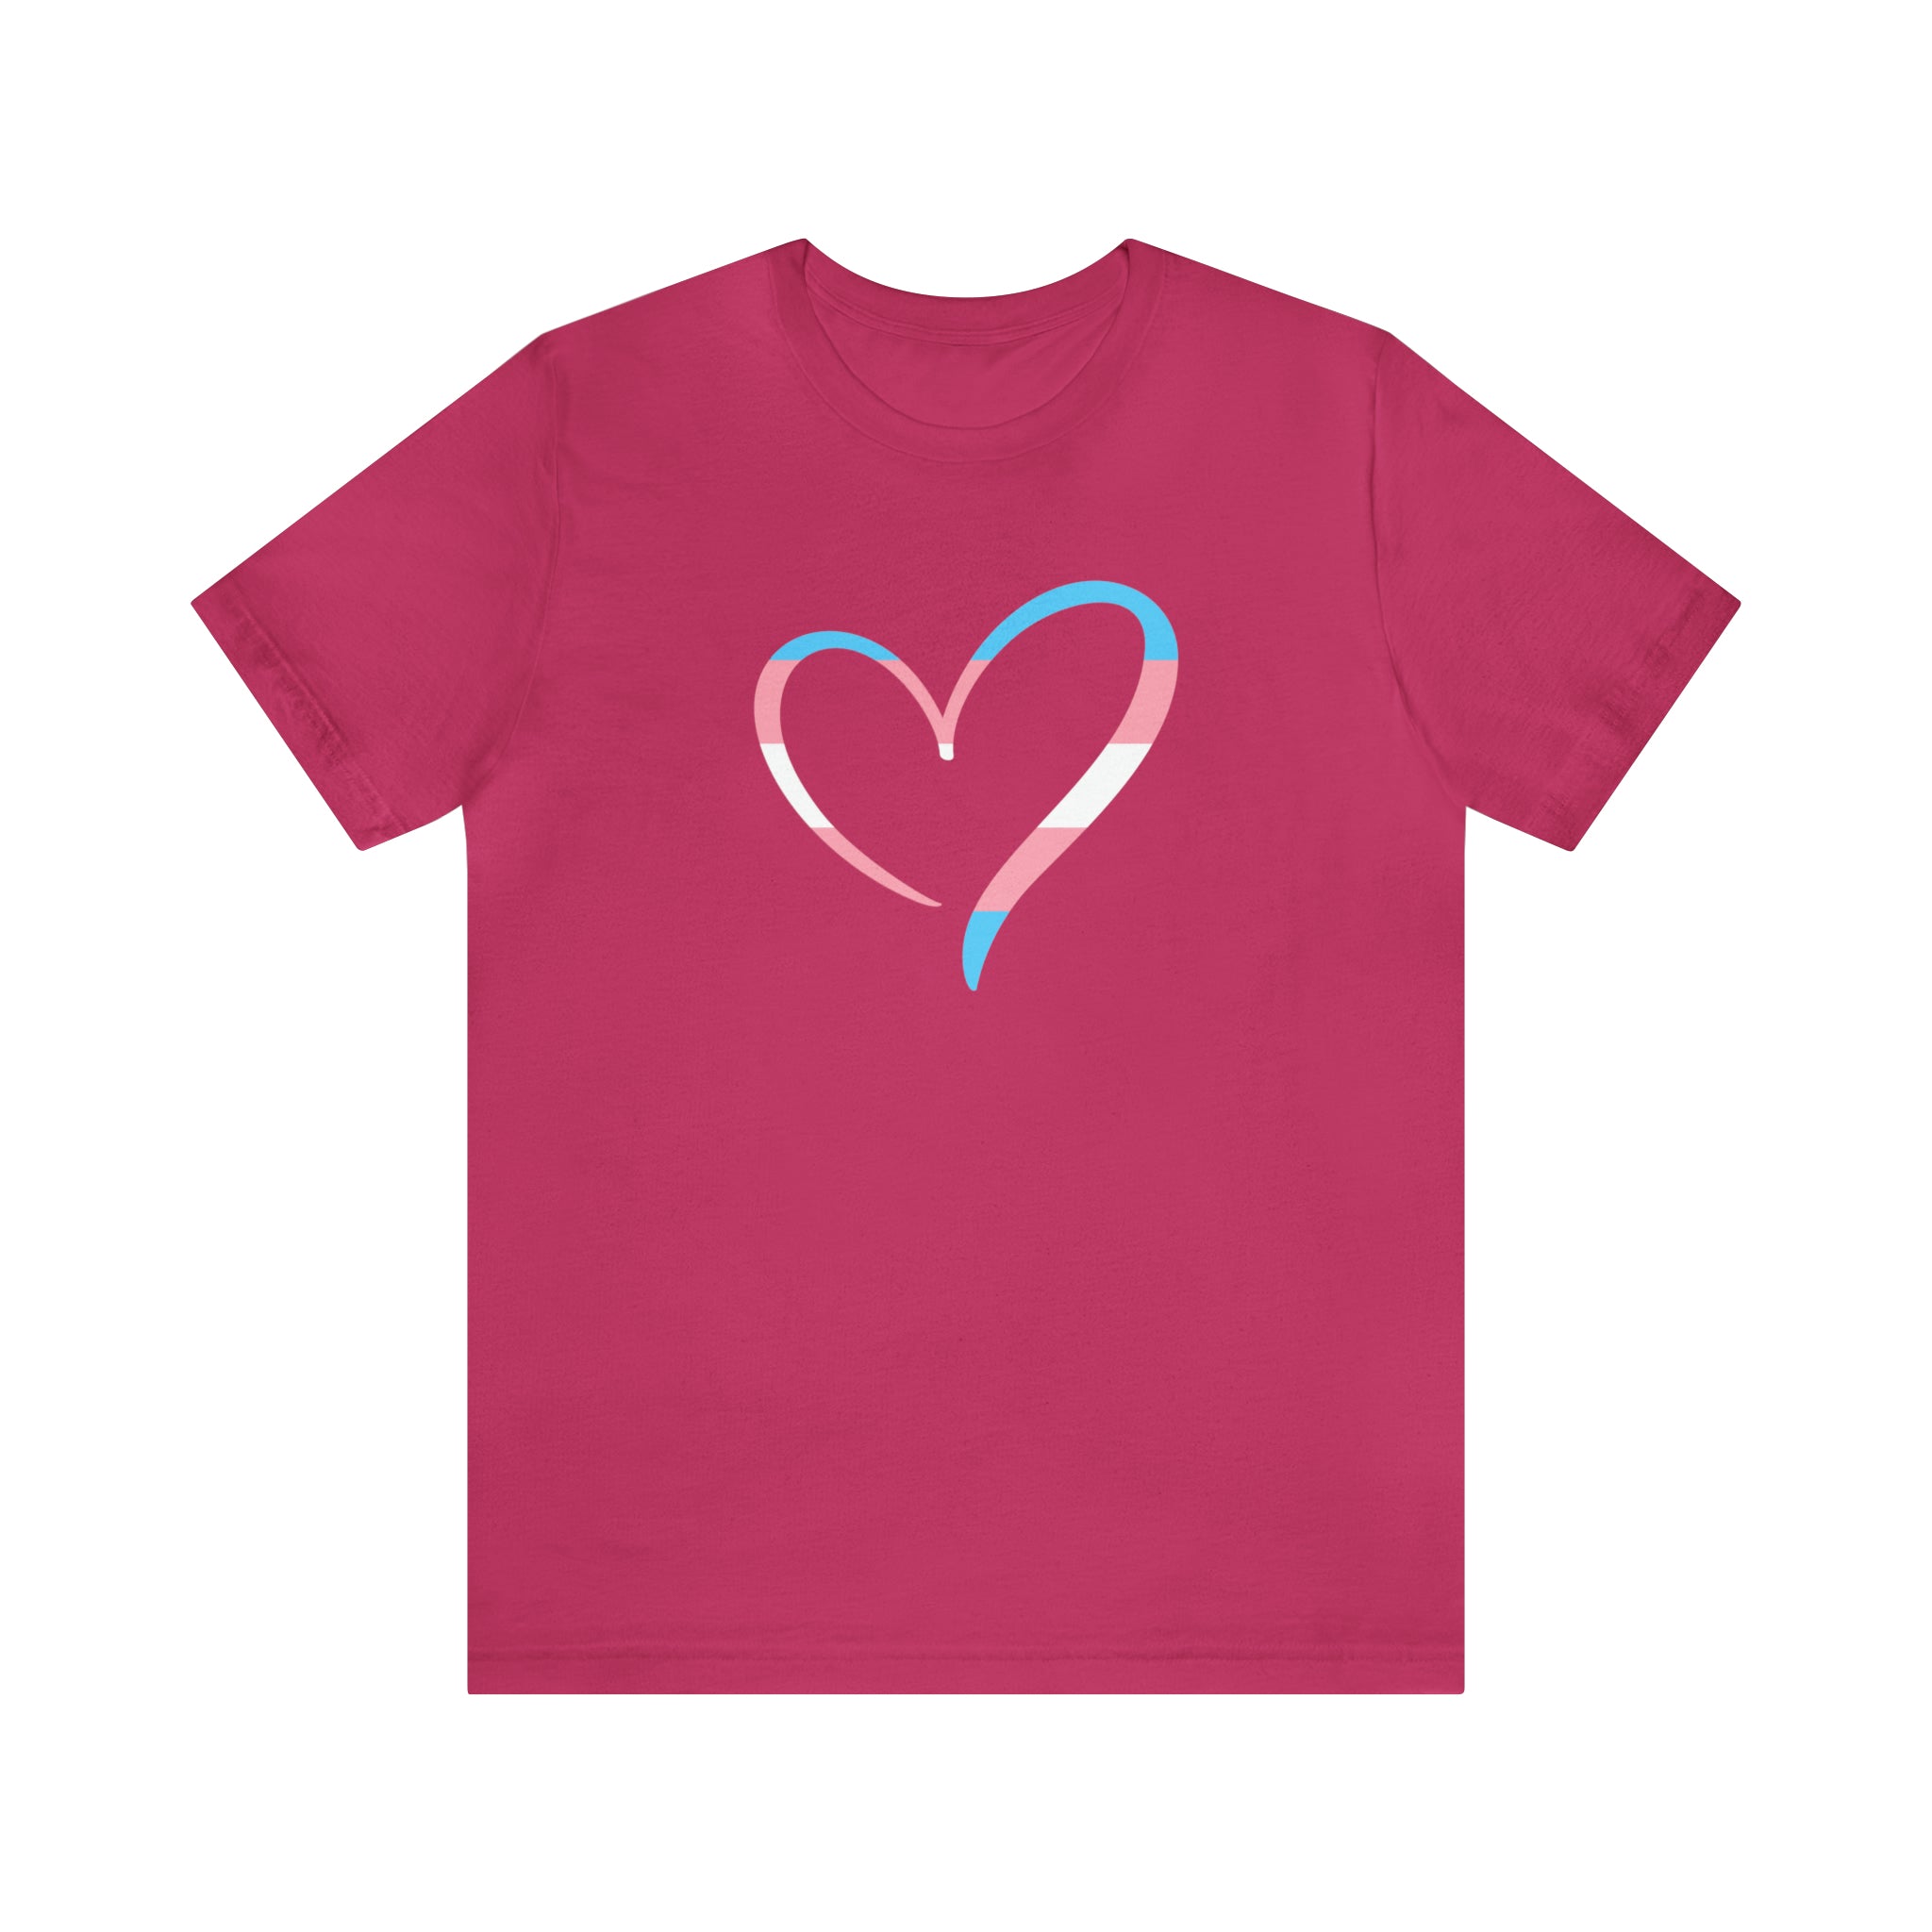 Trans Pride Heart T-Shirt by Wholesome Memes : Unisex 100% Comfy Cotton T-Shirt by Bella+Canvas